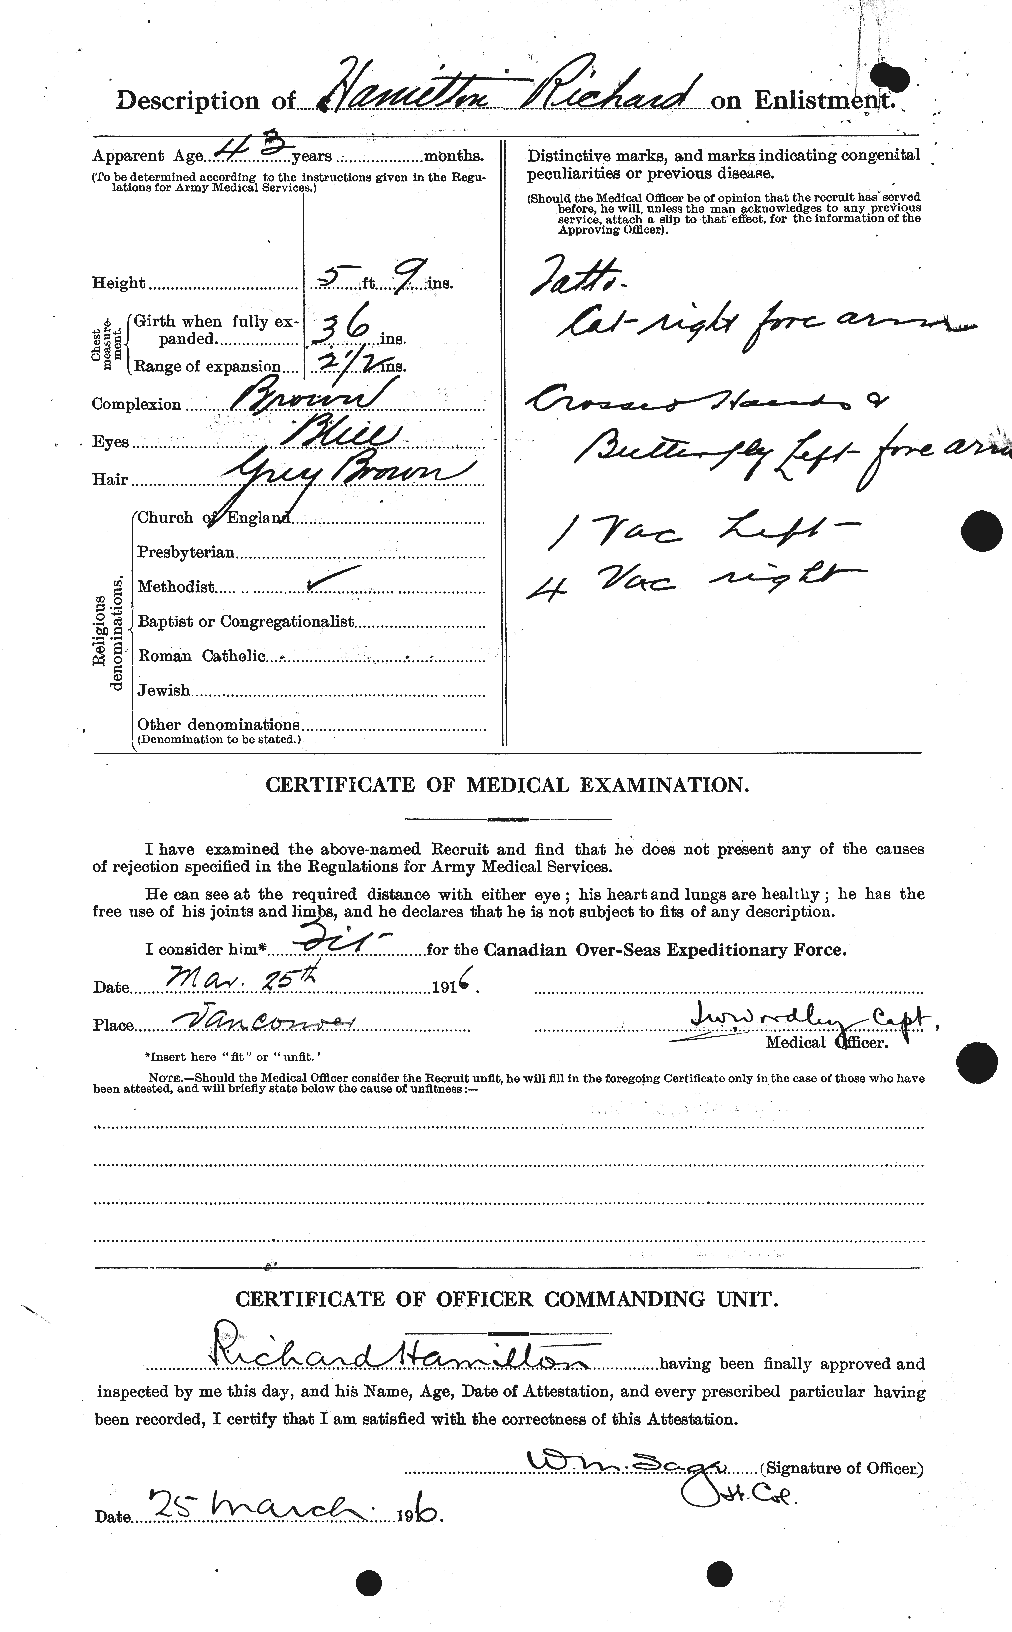 Personnel Records of the First World War - CEF 373216b